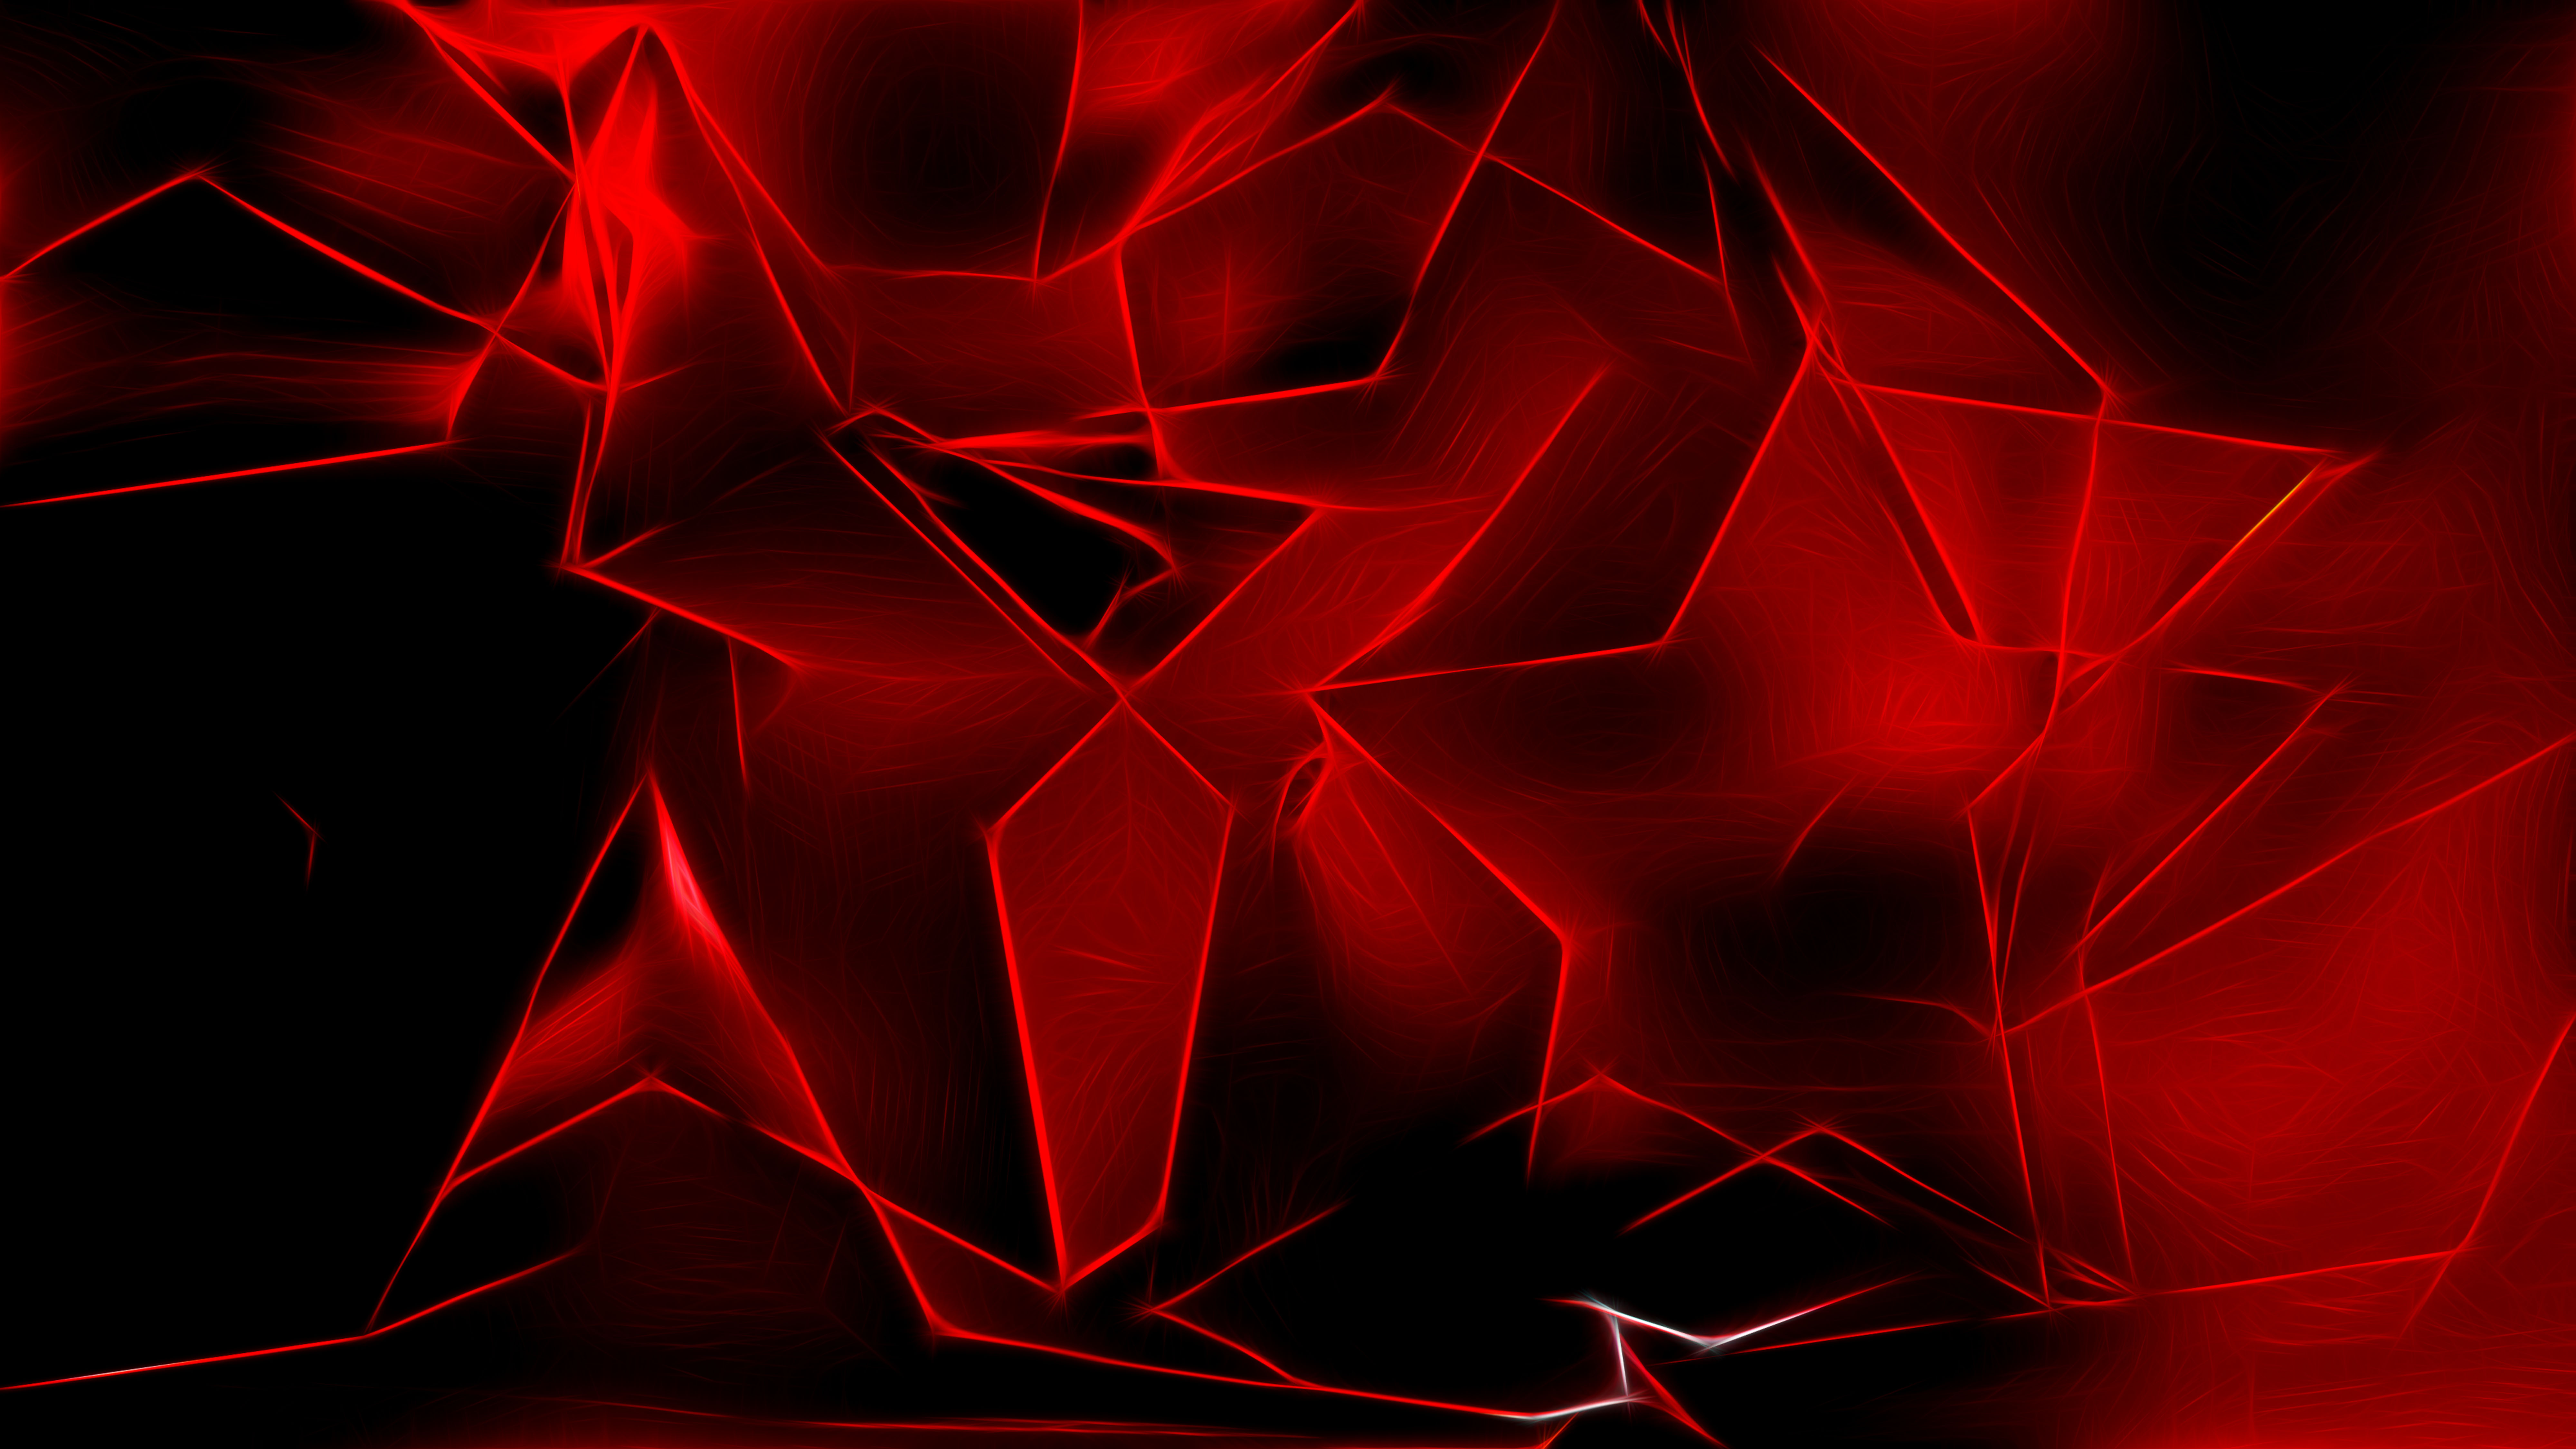 Free Abstract Cool Red Texture Background Design